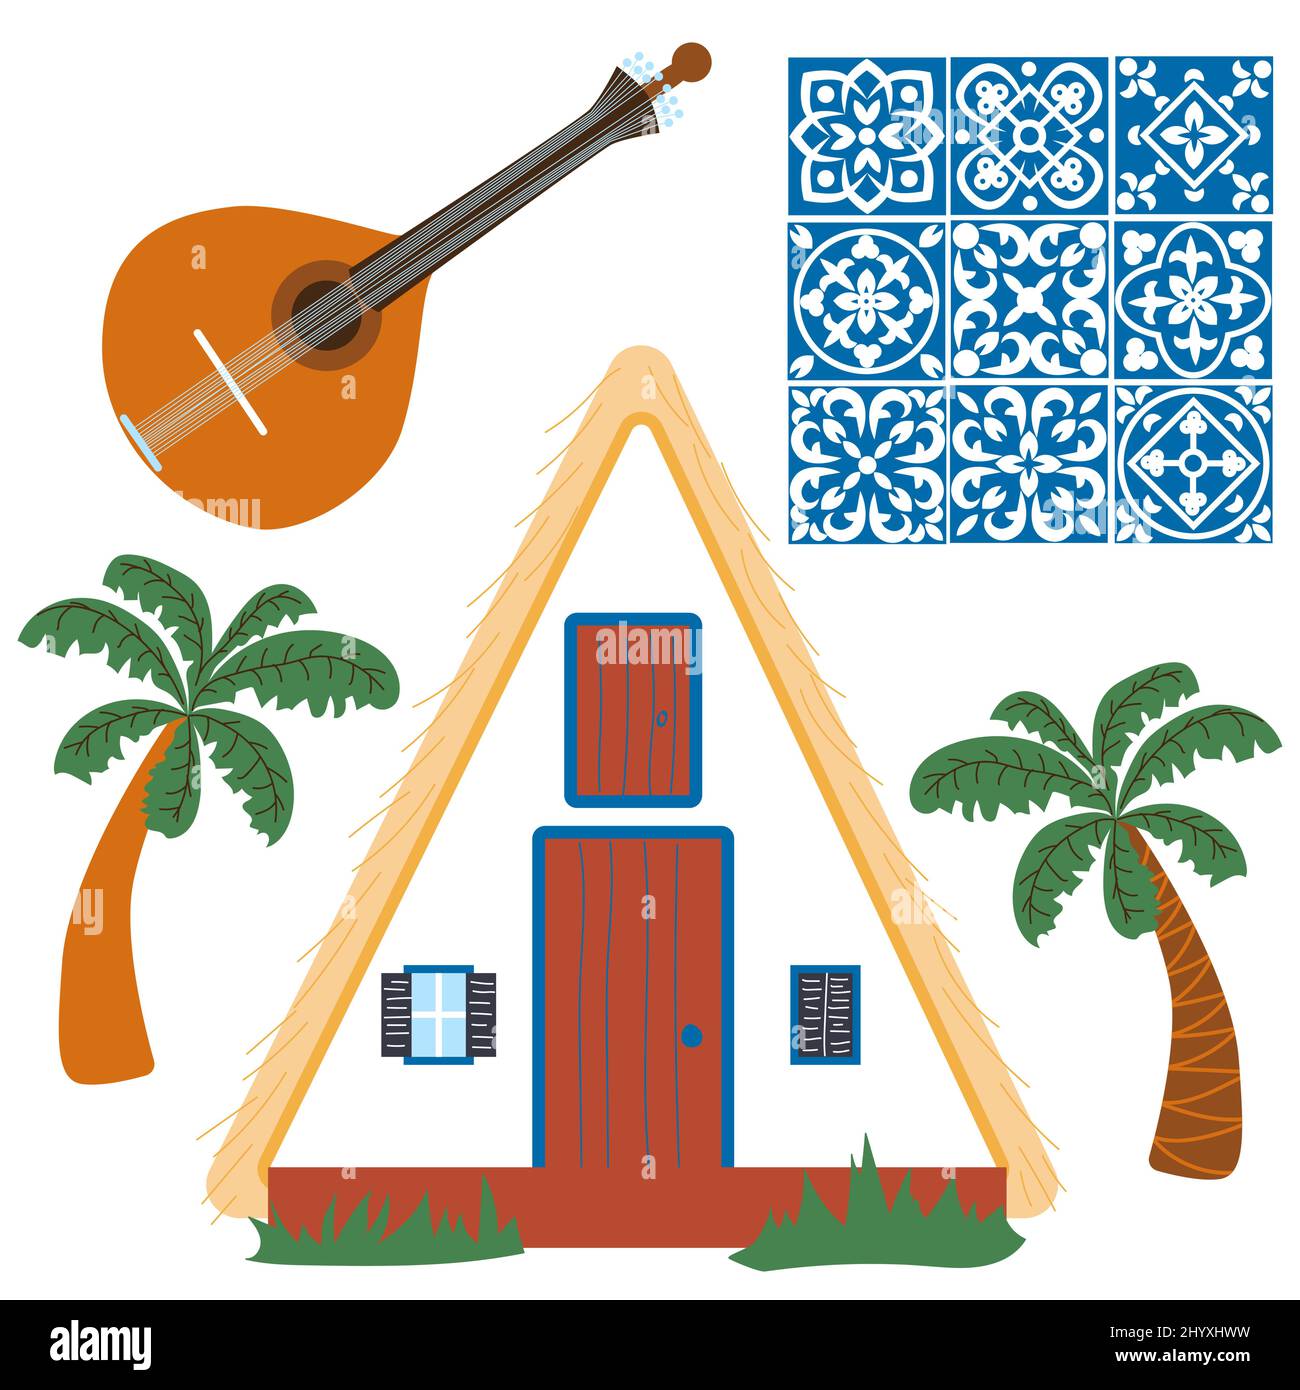 Palheiro. Portuguese traditional house. Triangular white house in Santana village in the east of Madeira island. It is a small stone structure with a sloping thatched roof down to the ground. Stock Vector